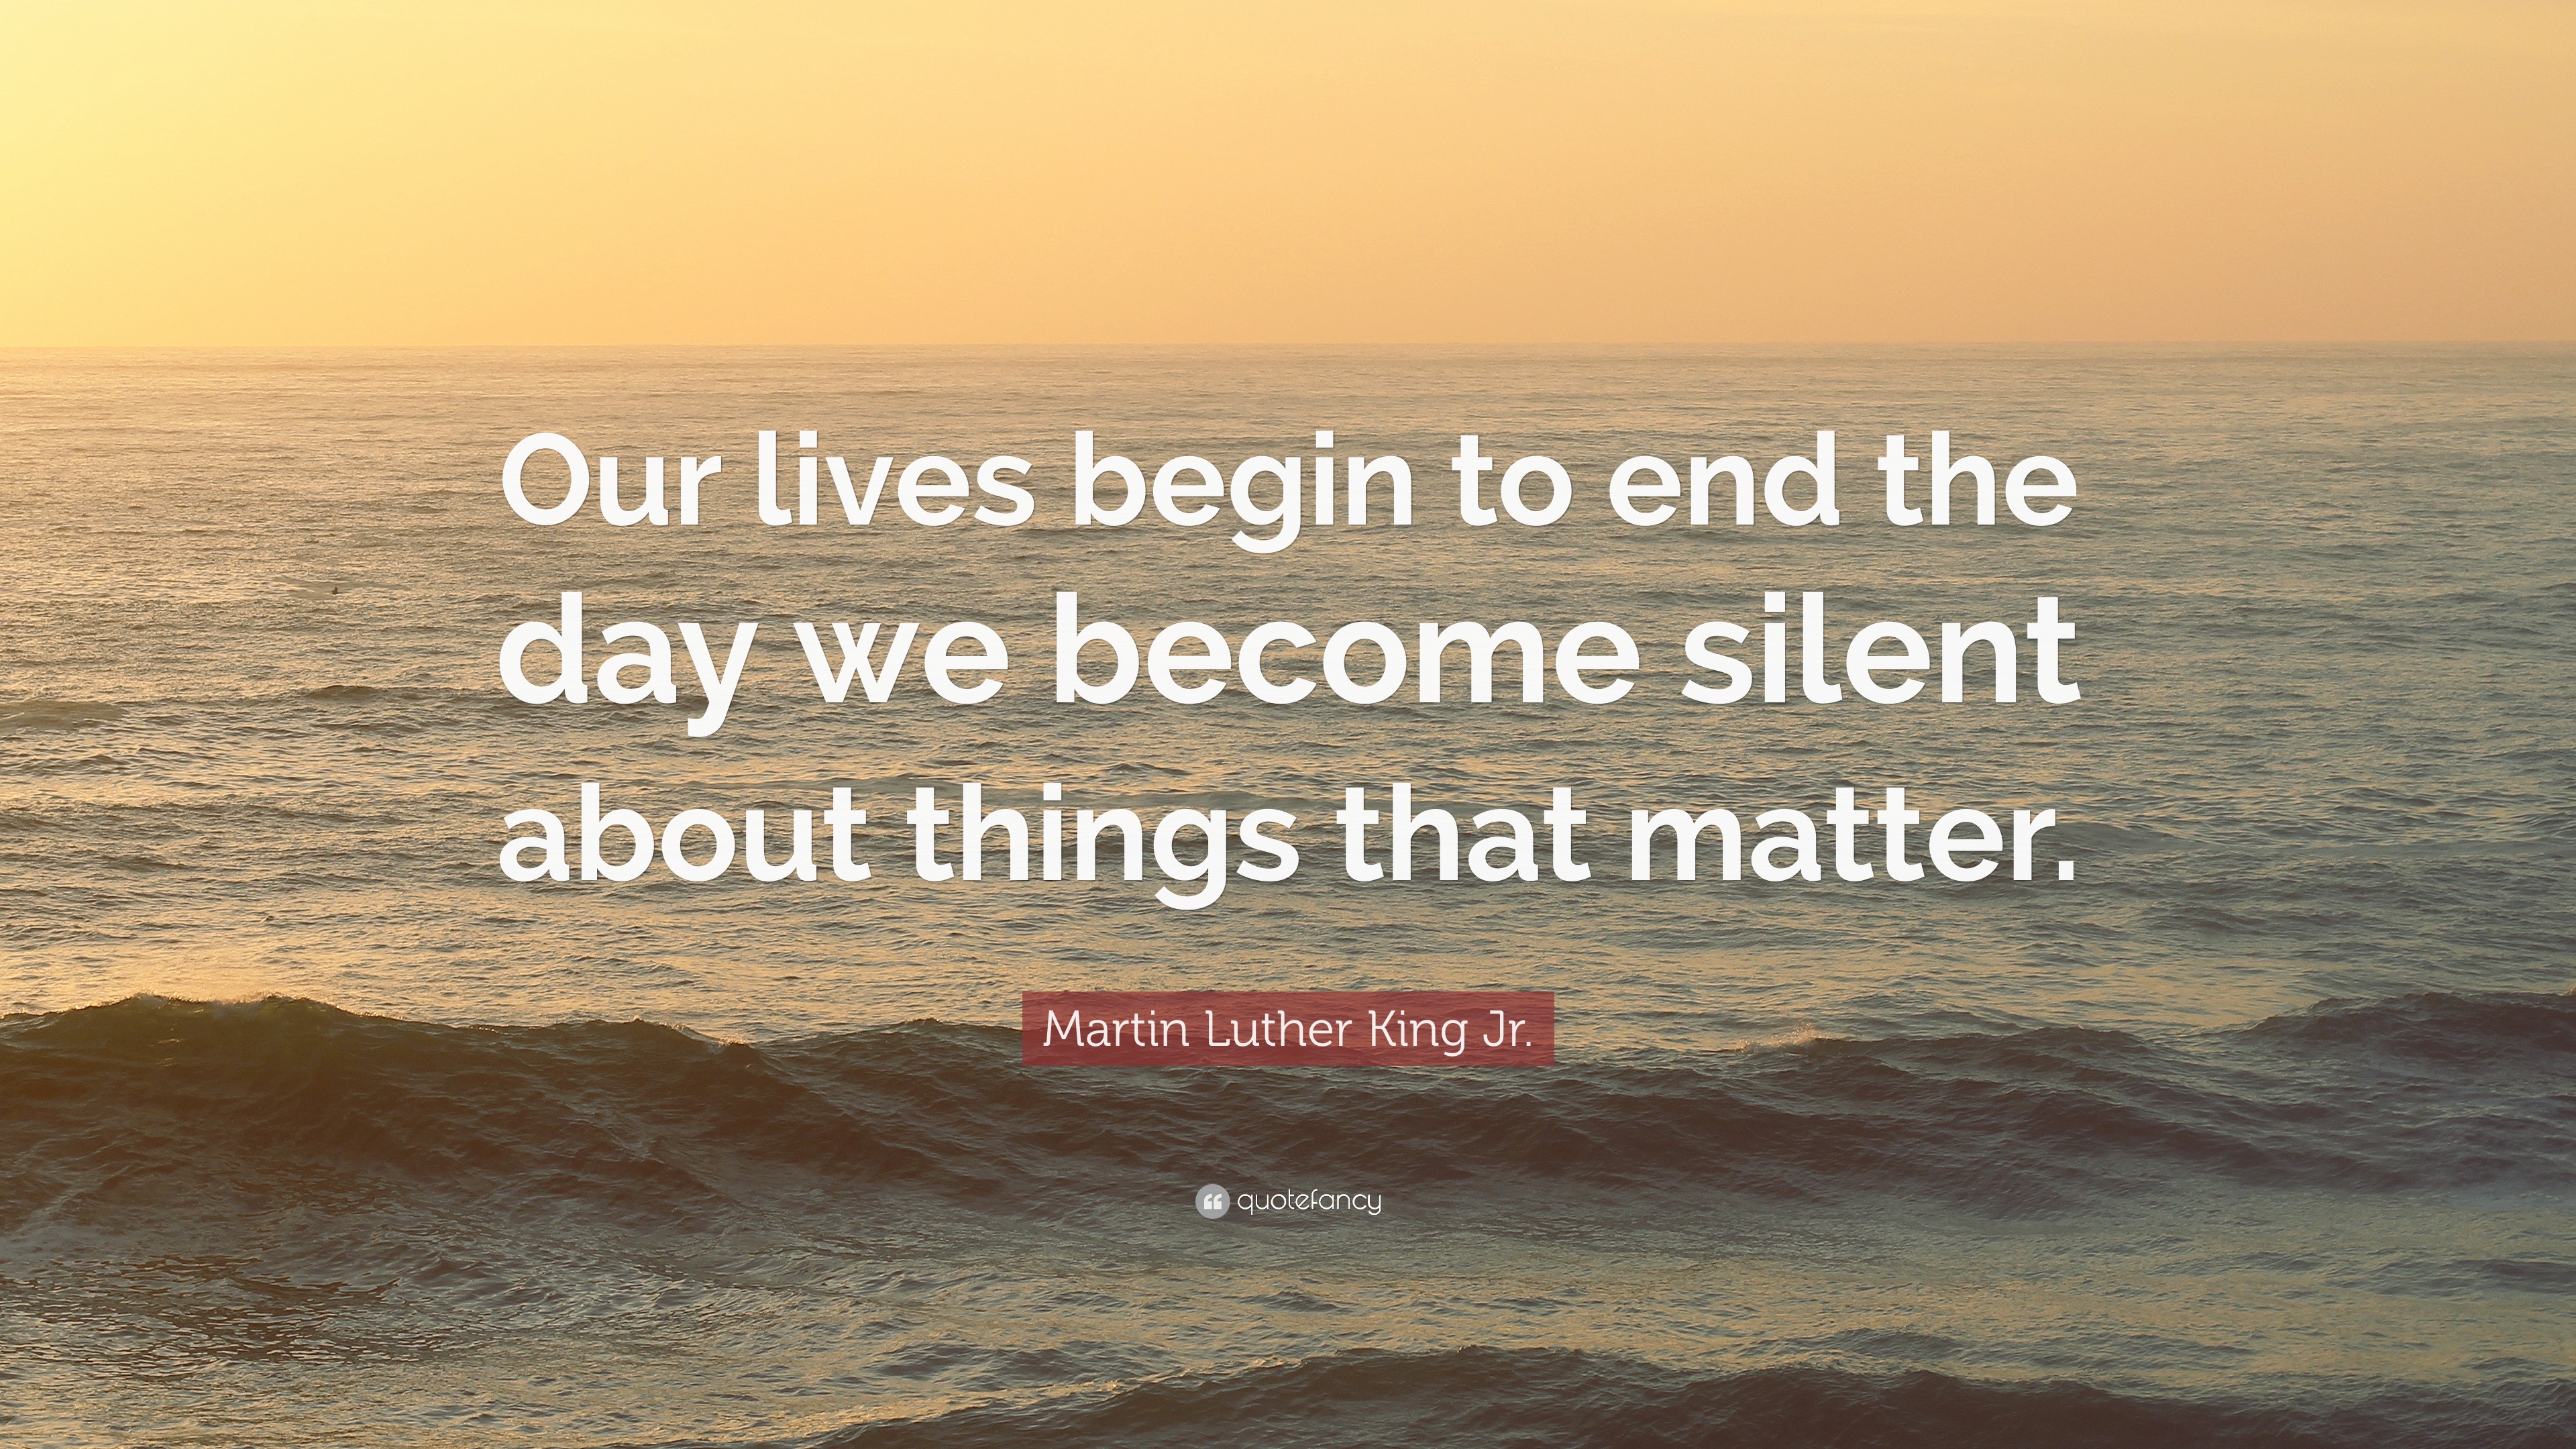 Martin Luther King Jr. Quote: “Our lives begin to end the day we become